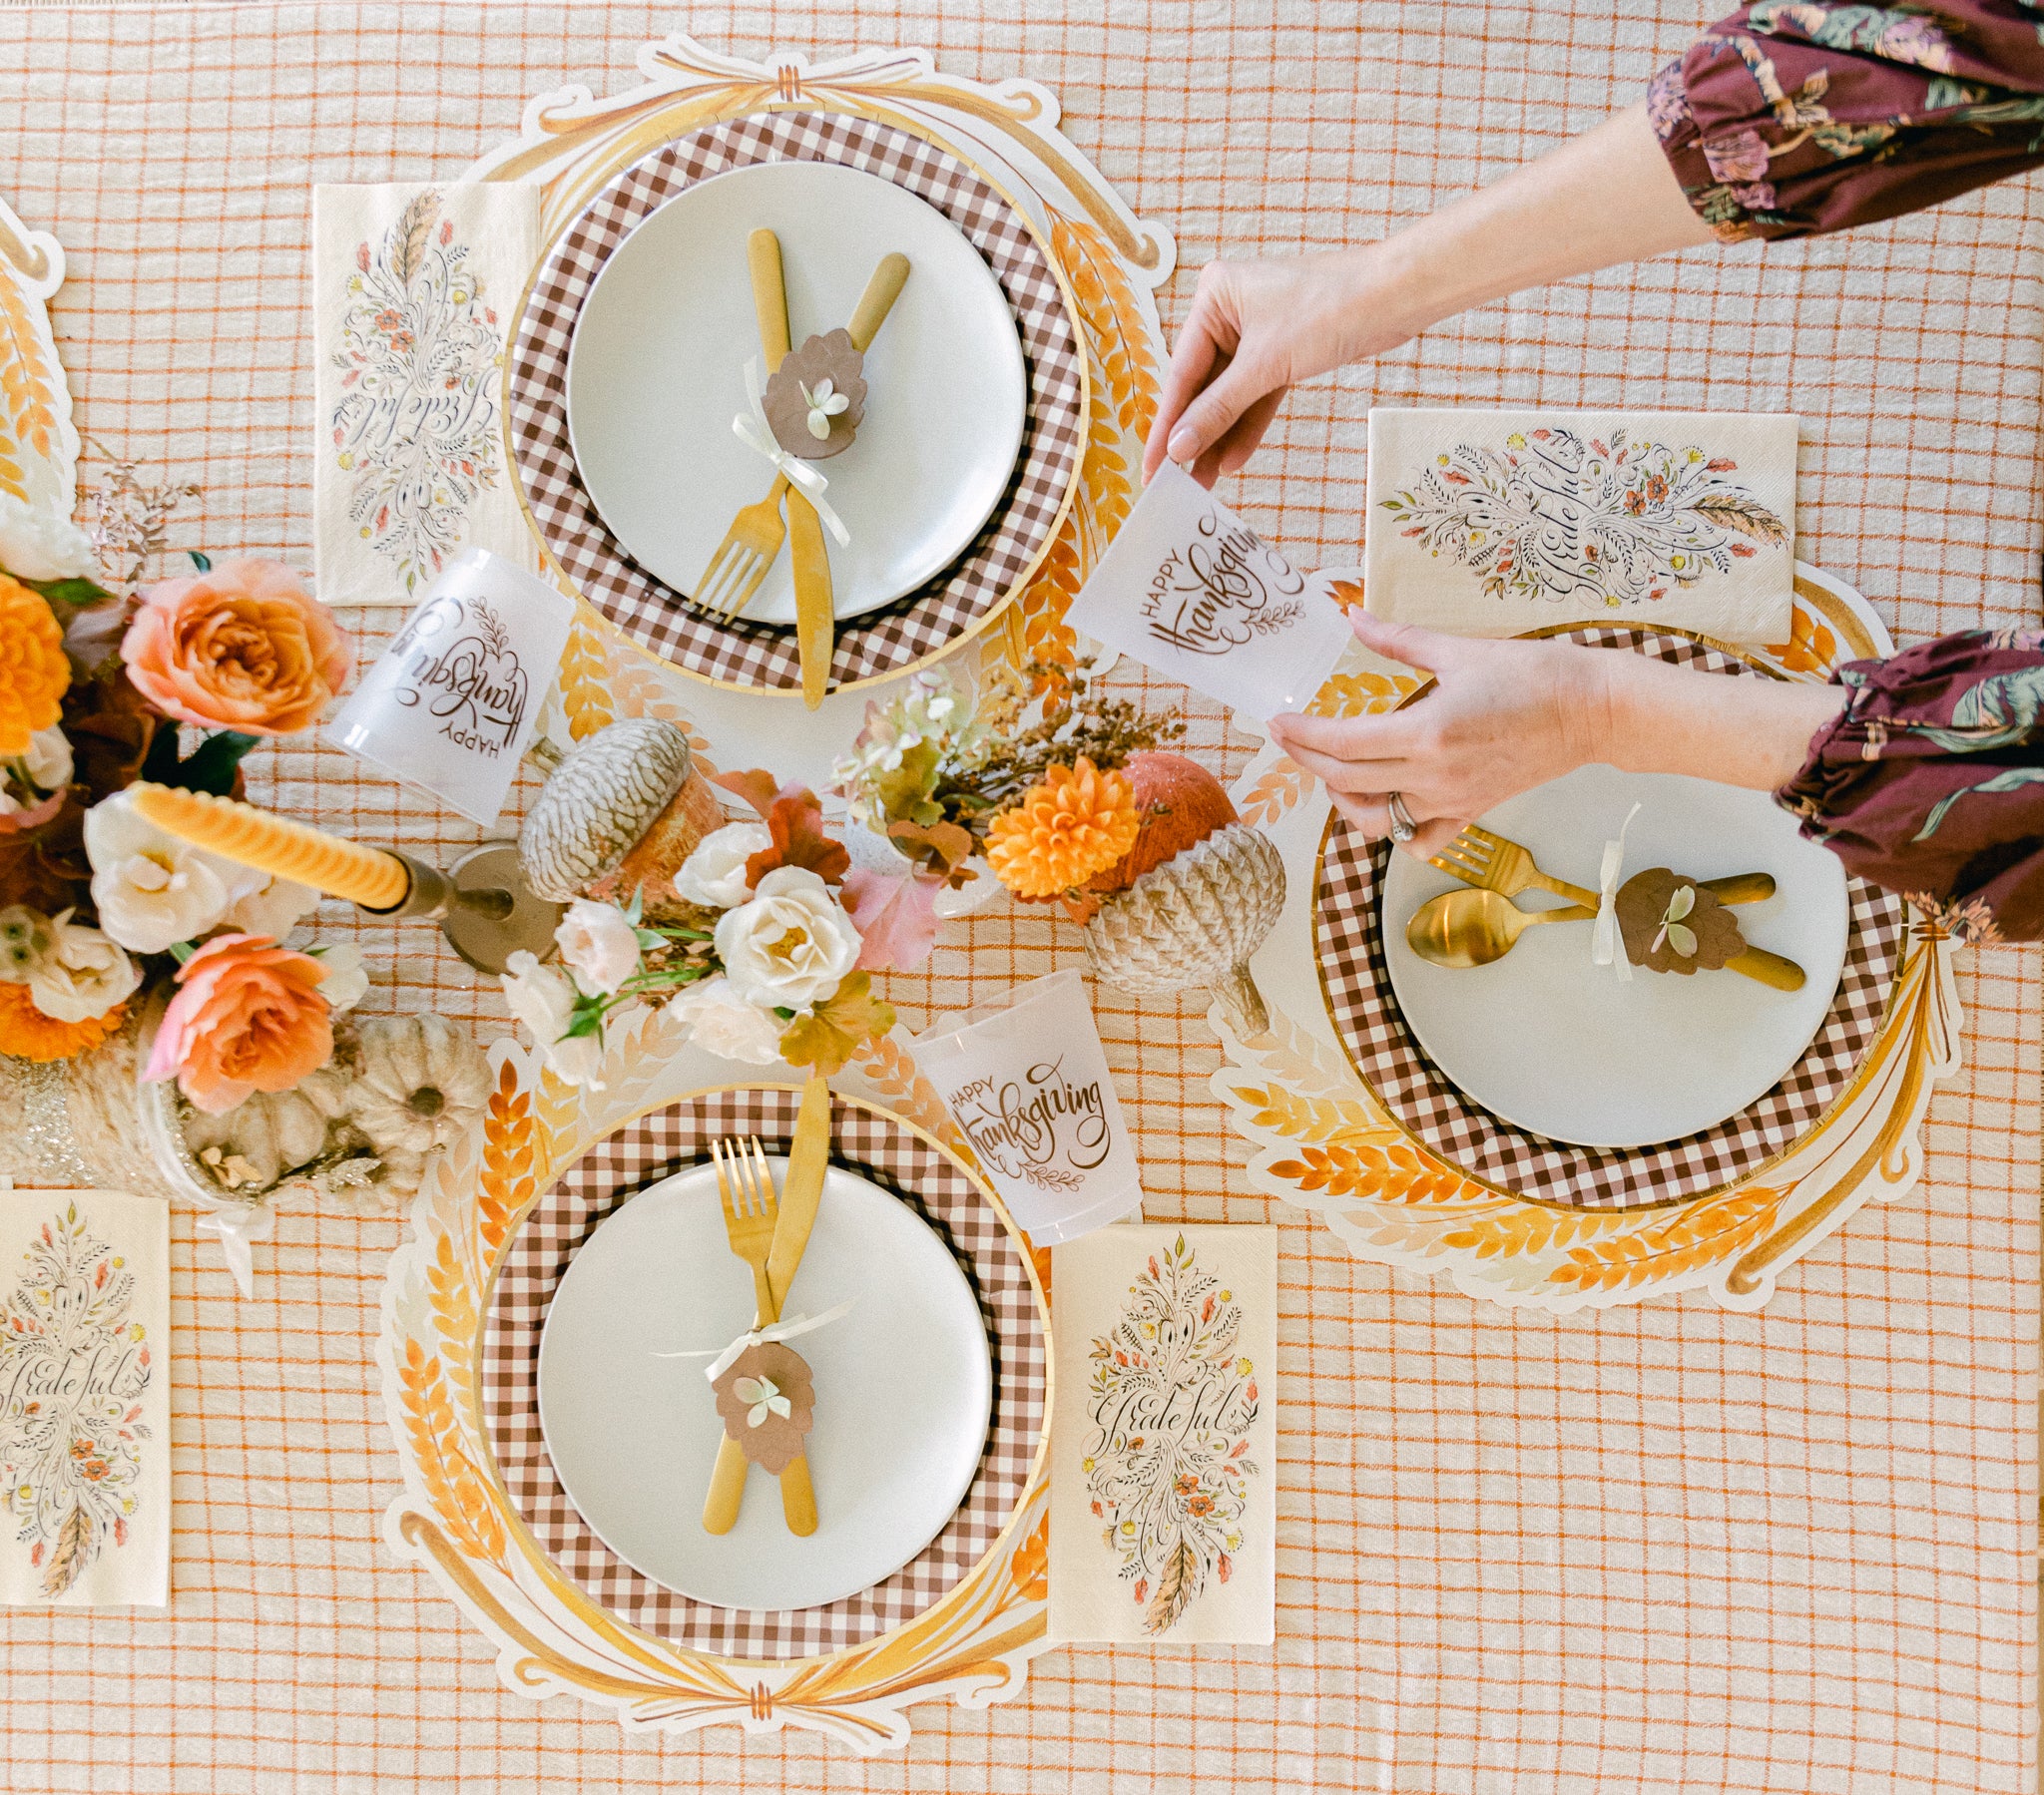 Thanksgiving table setting ideas with paperware and fine dinnerware.